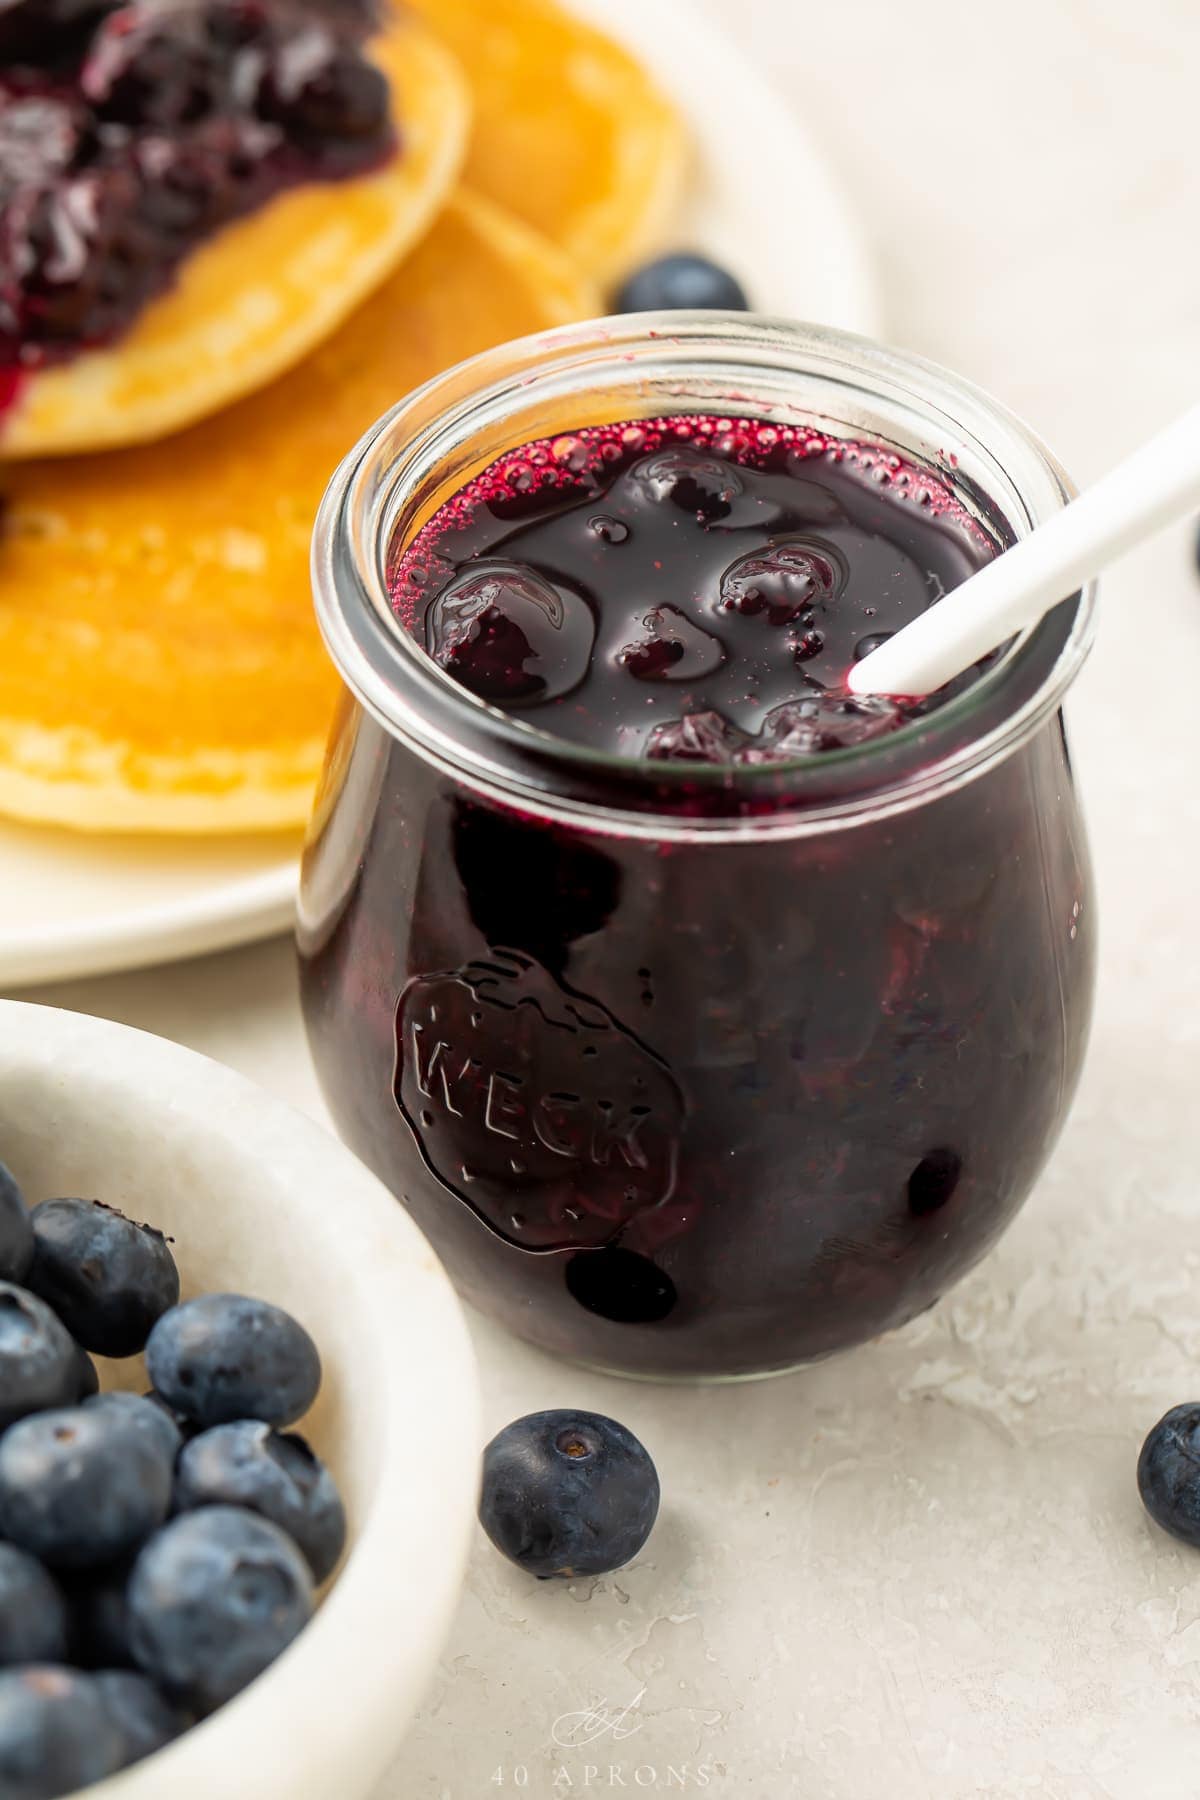 Blueberry Compote (with Fresh Blueberries) - Aprons